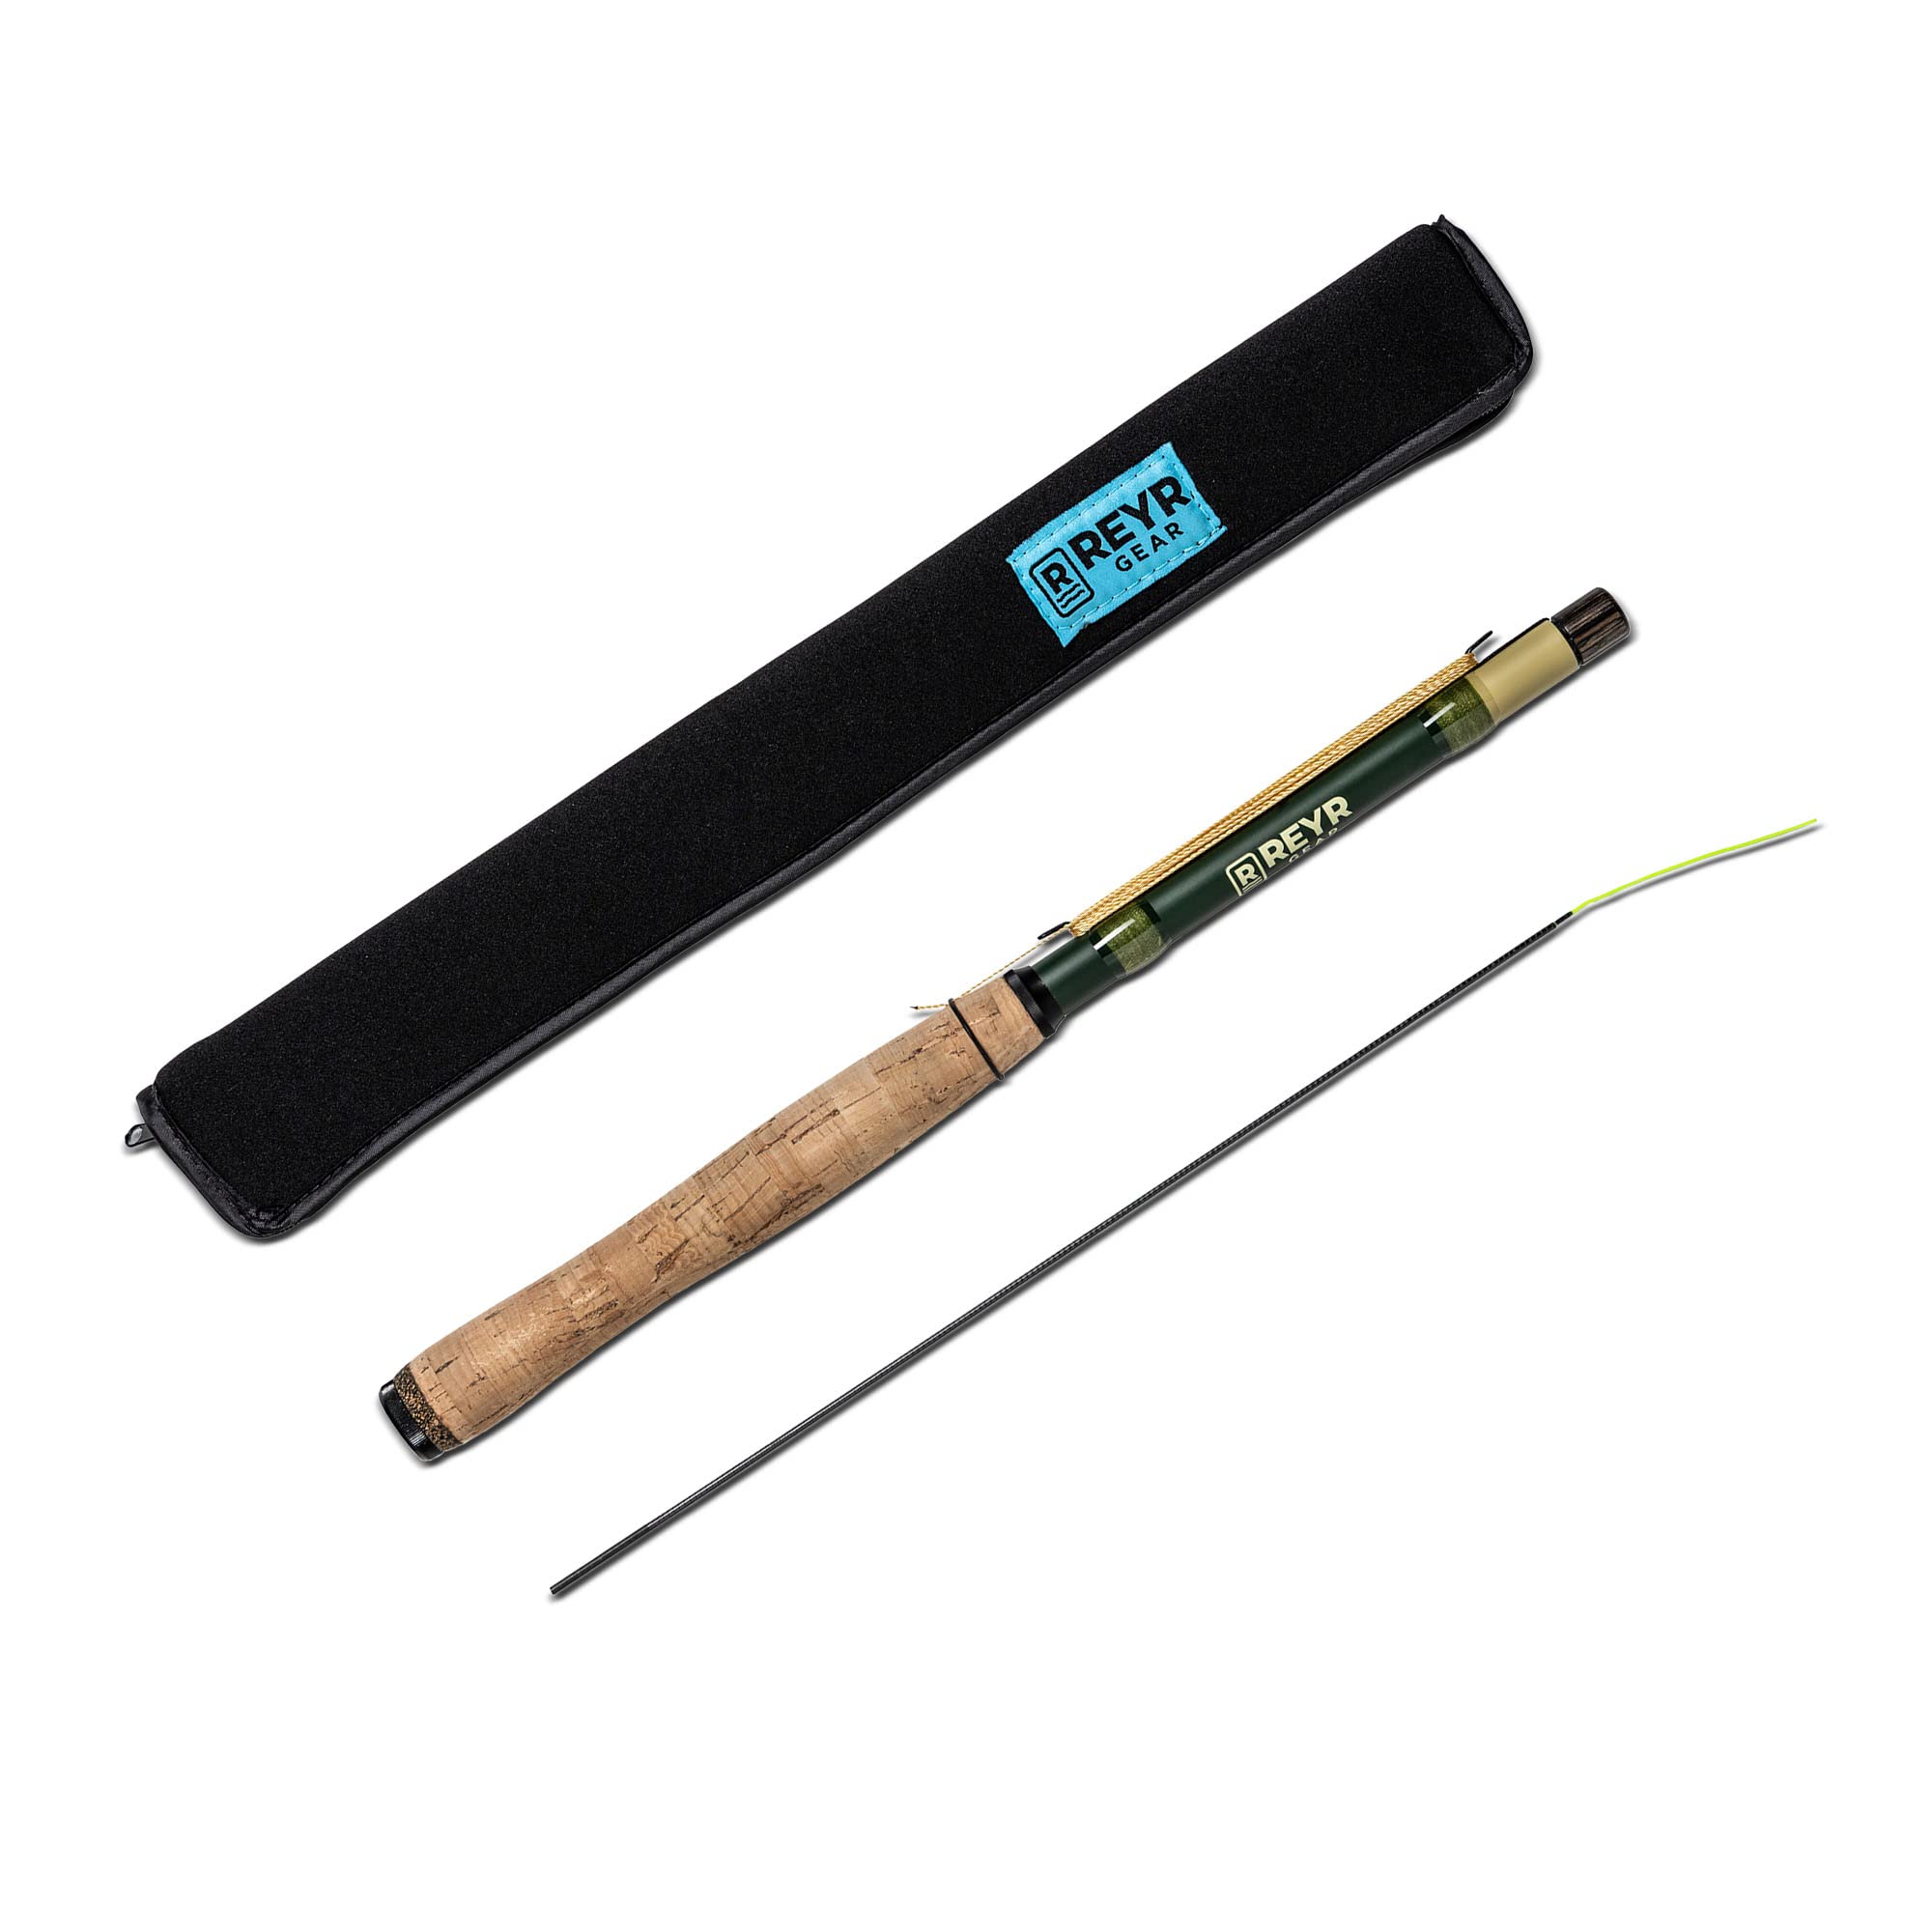  Fly Fishing Rods - G. Loomis / Fly Fishing Rods / Fly Fishing  Equipment: Sports & Outdoors